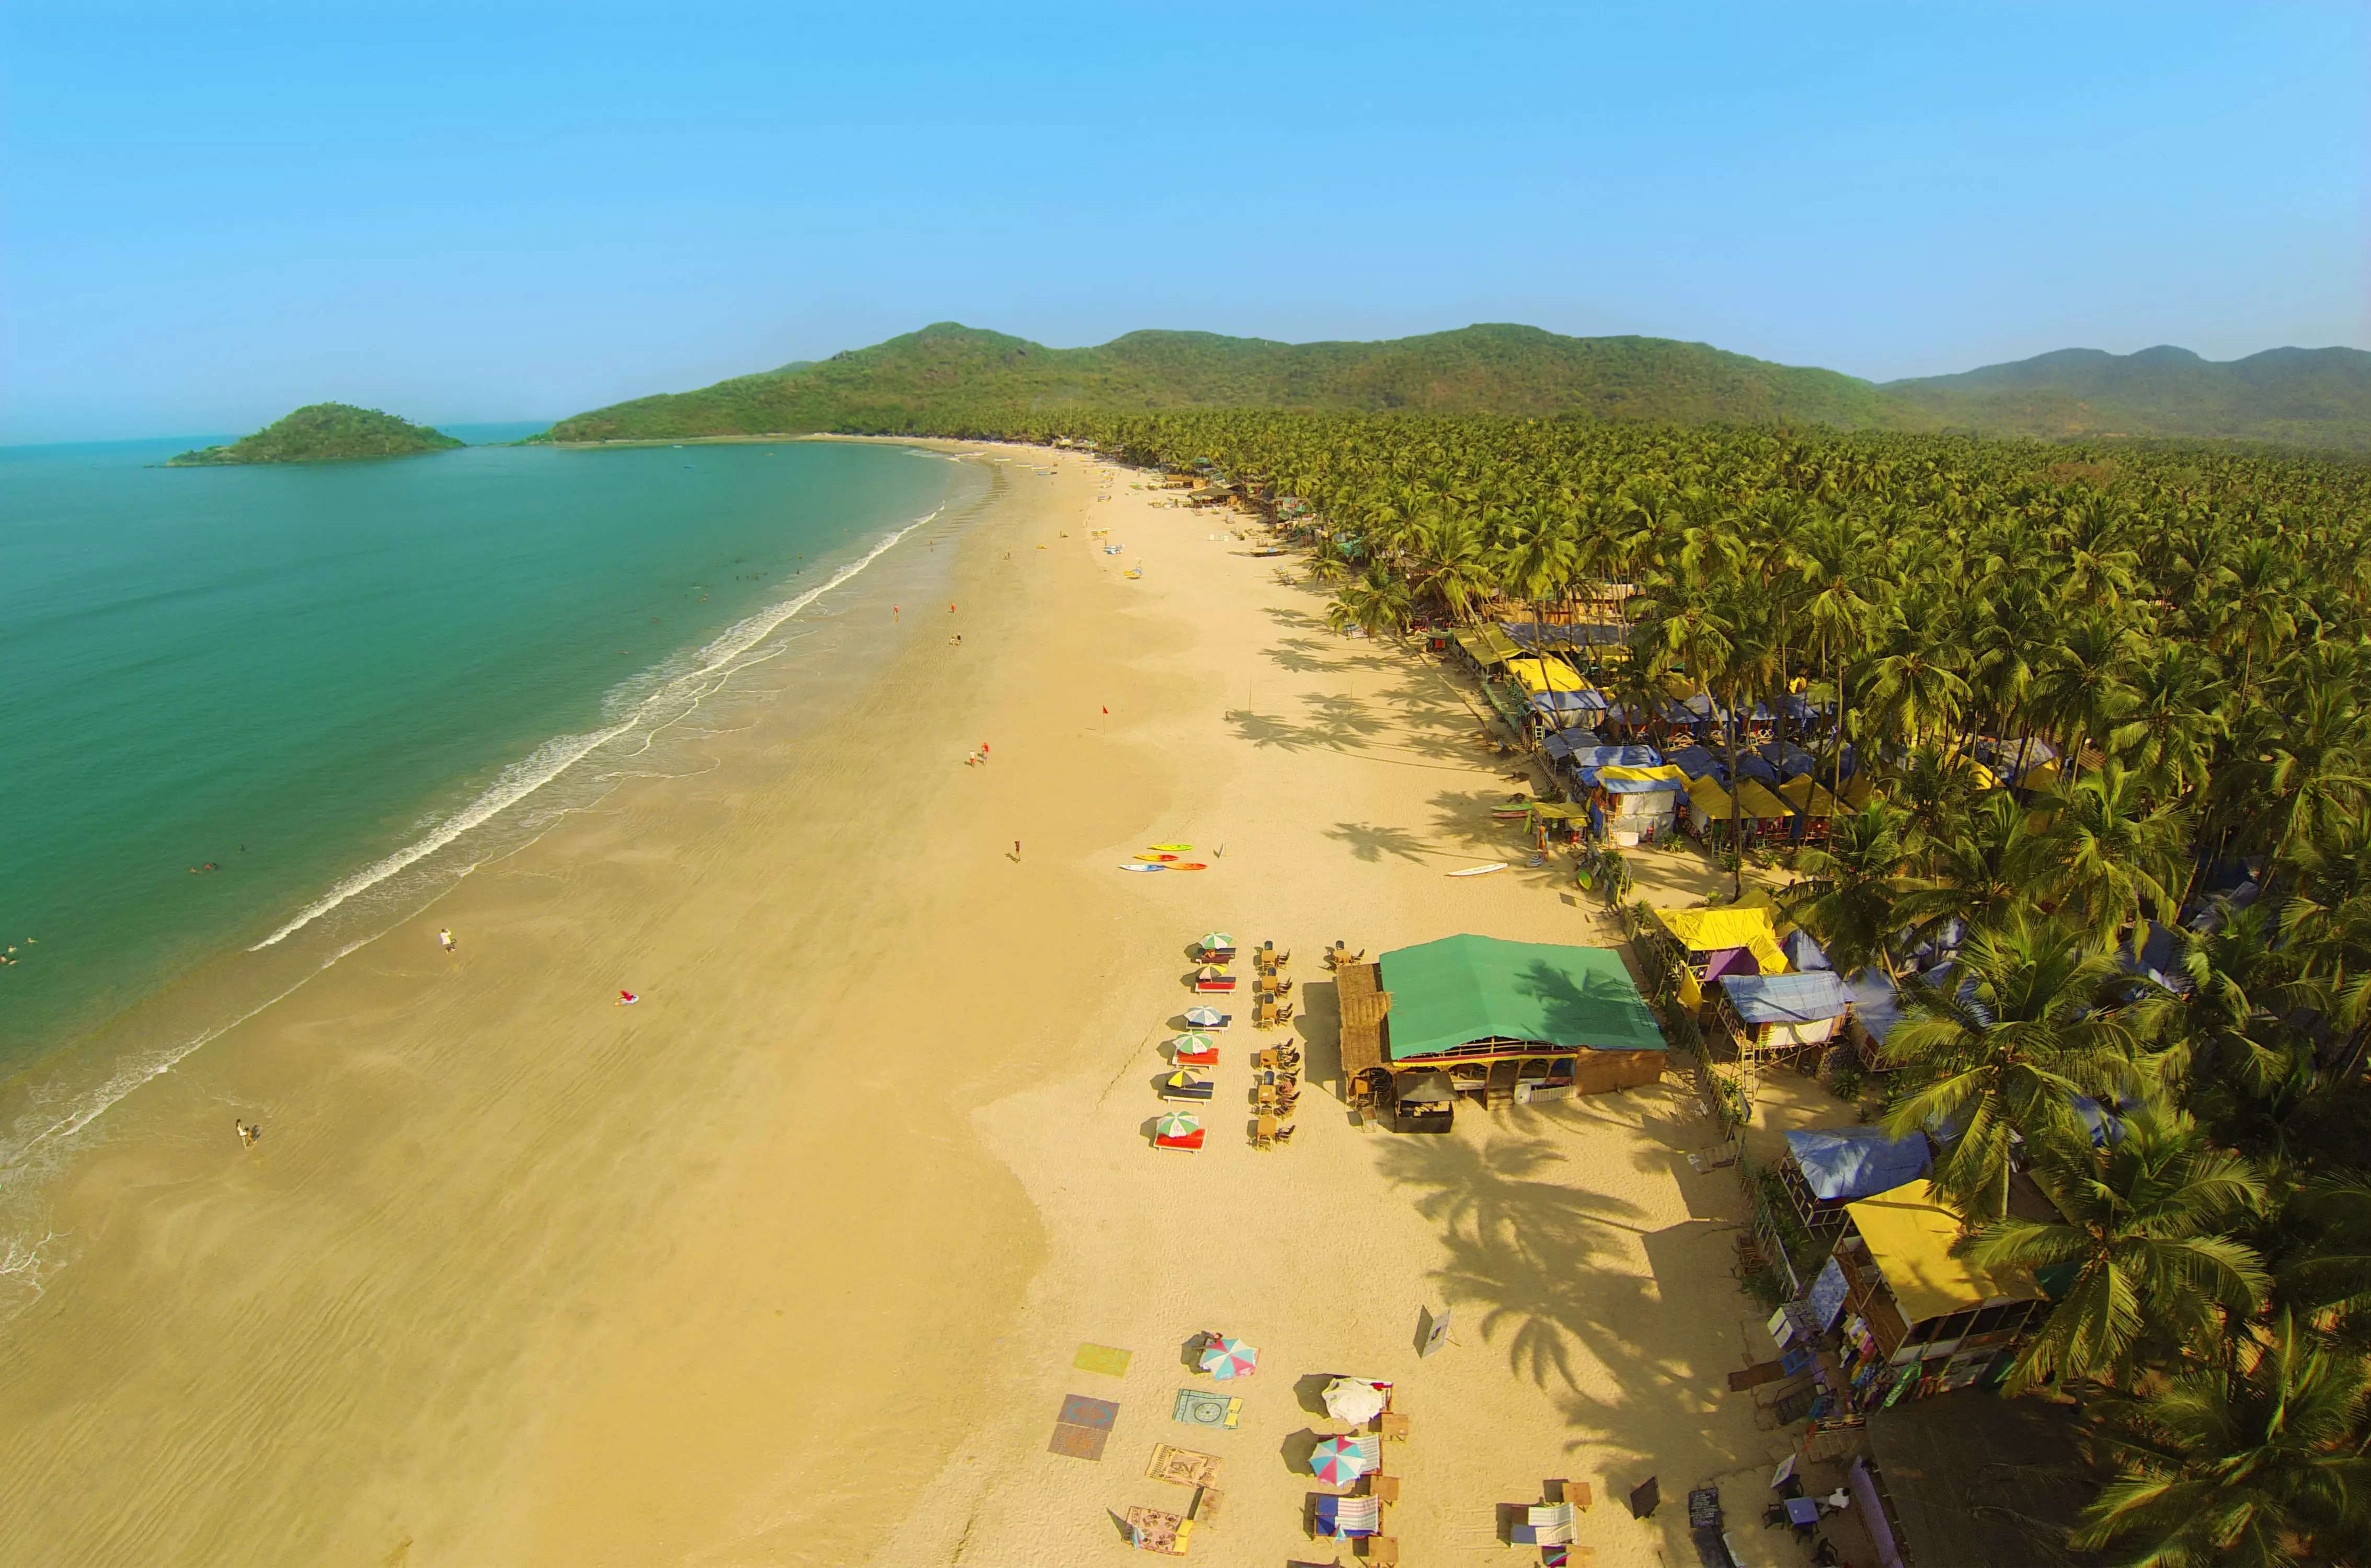 <p>Goa tourism dept ties-up with Ironman race organisers to promote sports tourism (Picture used for representational purposes only)</p>